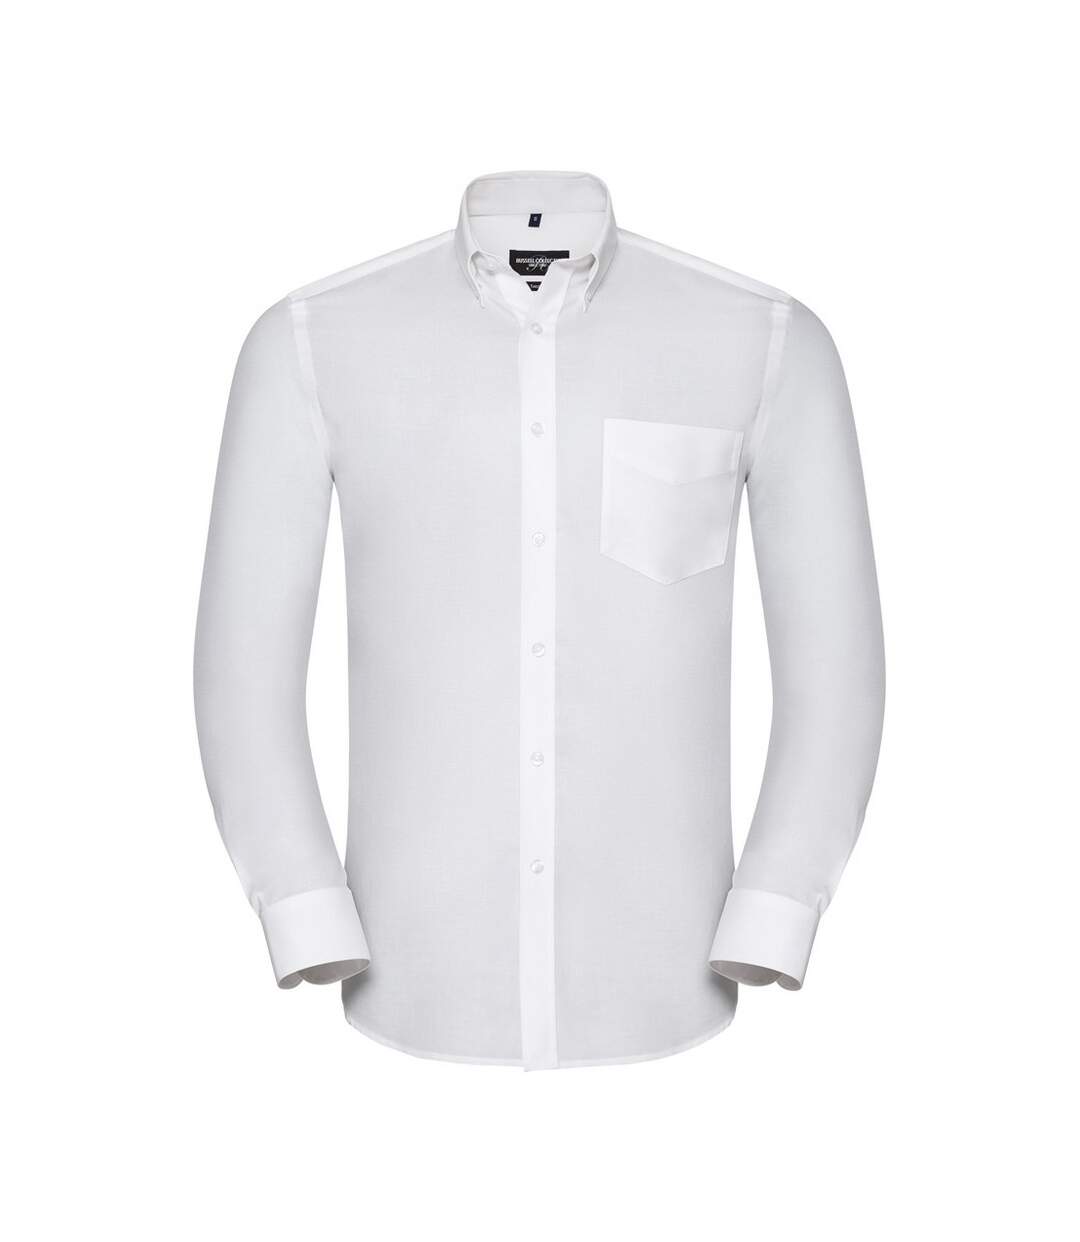 Russell Collection - Chemise - Homme (Blanc) - UTPC3671